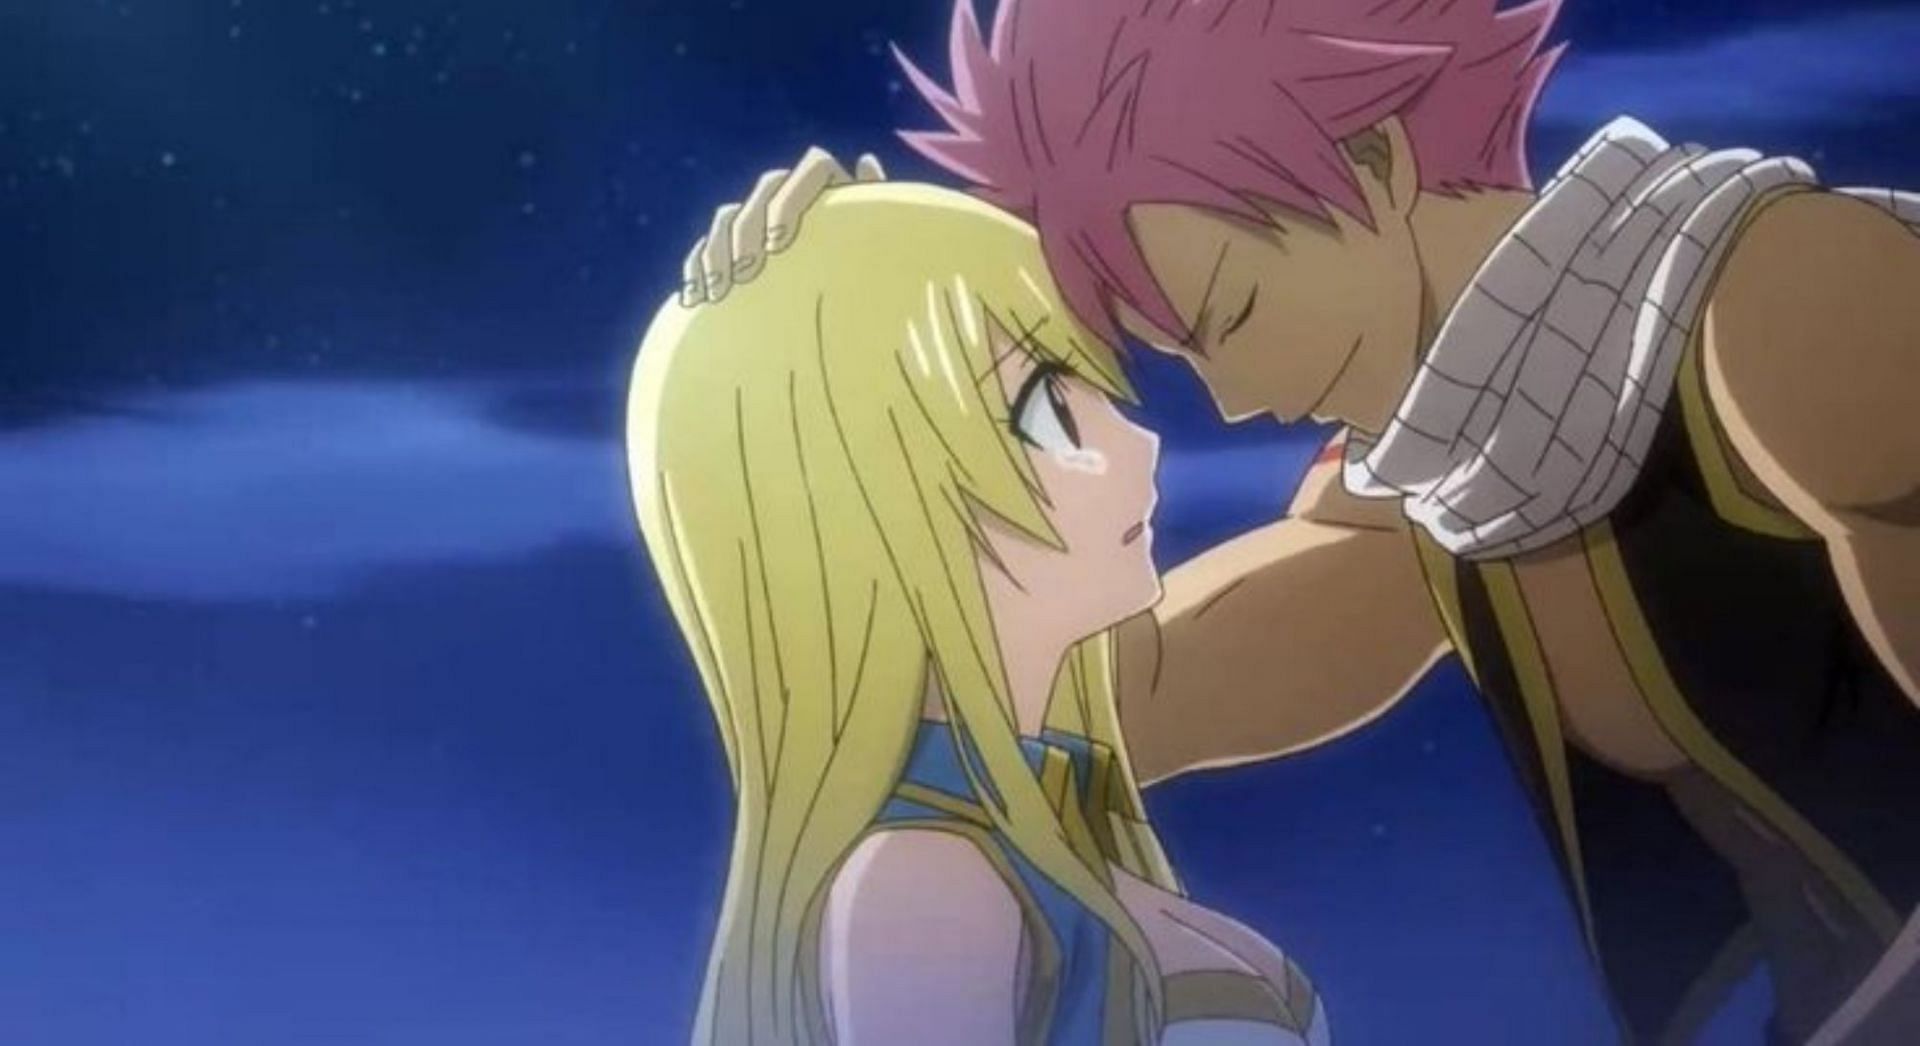 Biggest fan service in Fairy Tail #fairytail #natsu #lucy #erza #happy, Fairy  Tail